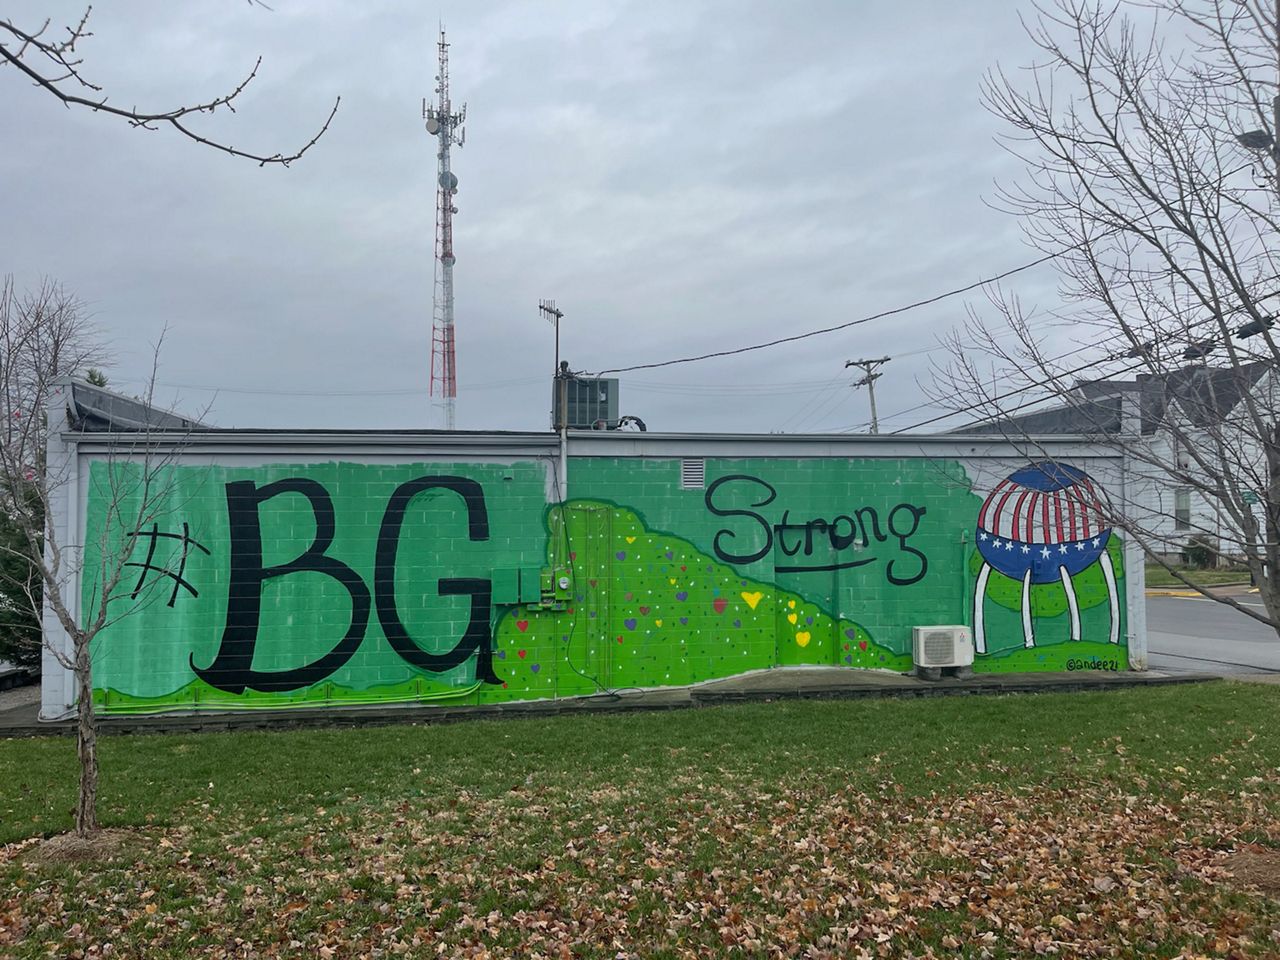 A graffitied wall in Bowling Green, Ky. reads "#BGStrong". (Provided: Crossroads Church Masters of Disaster)